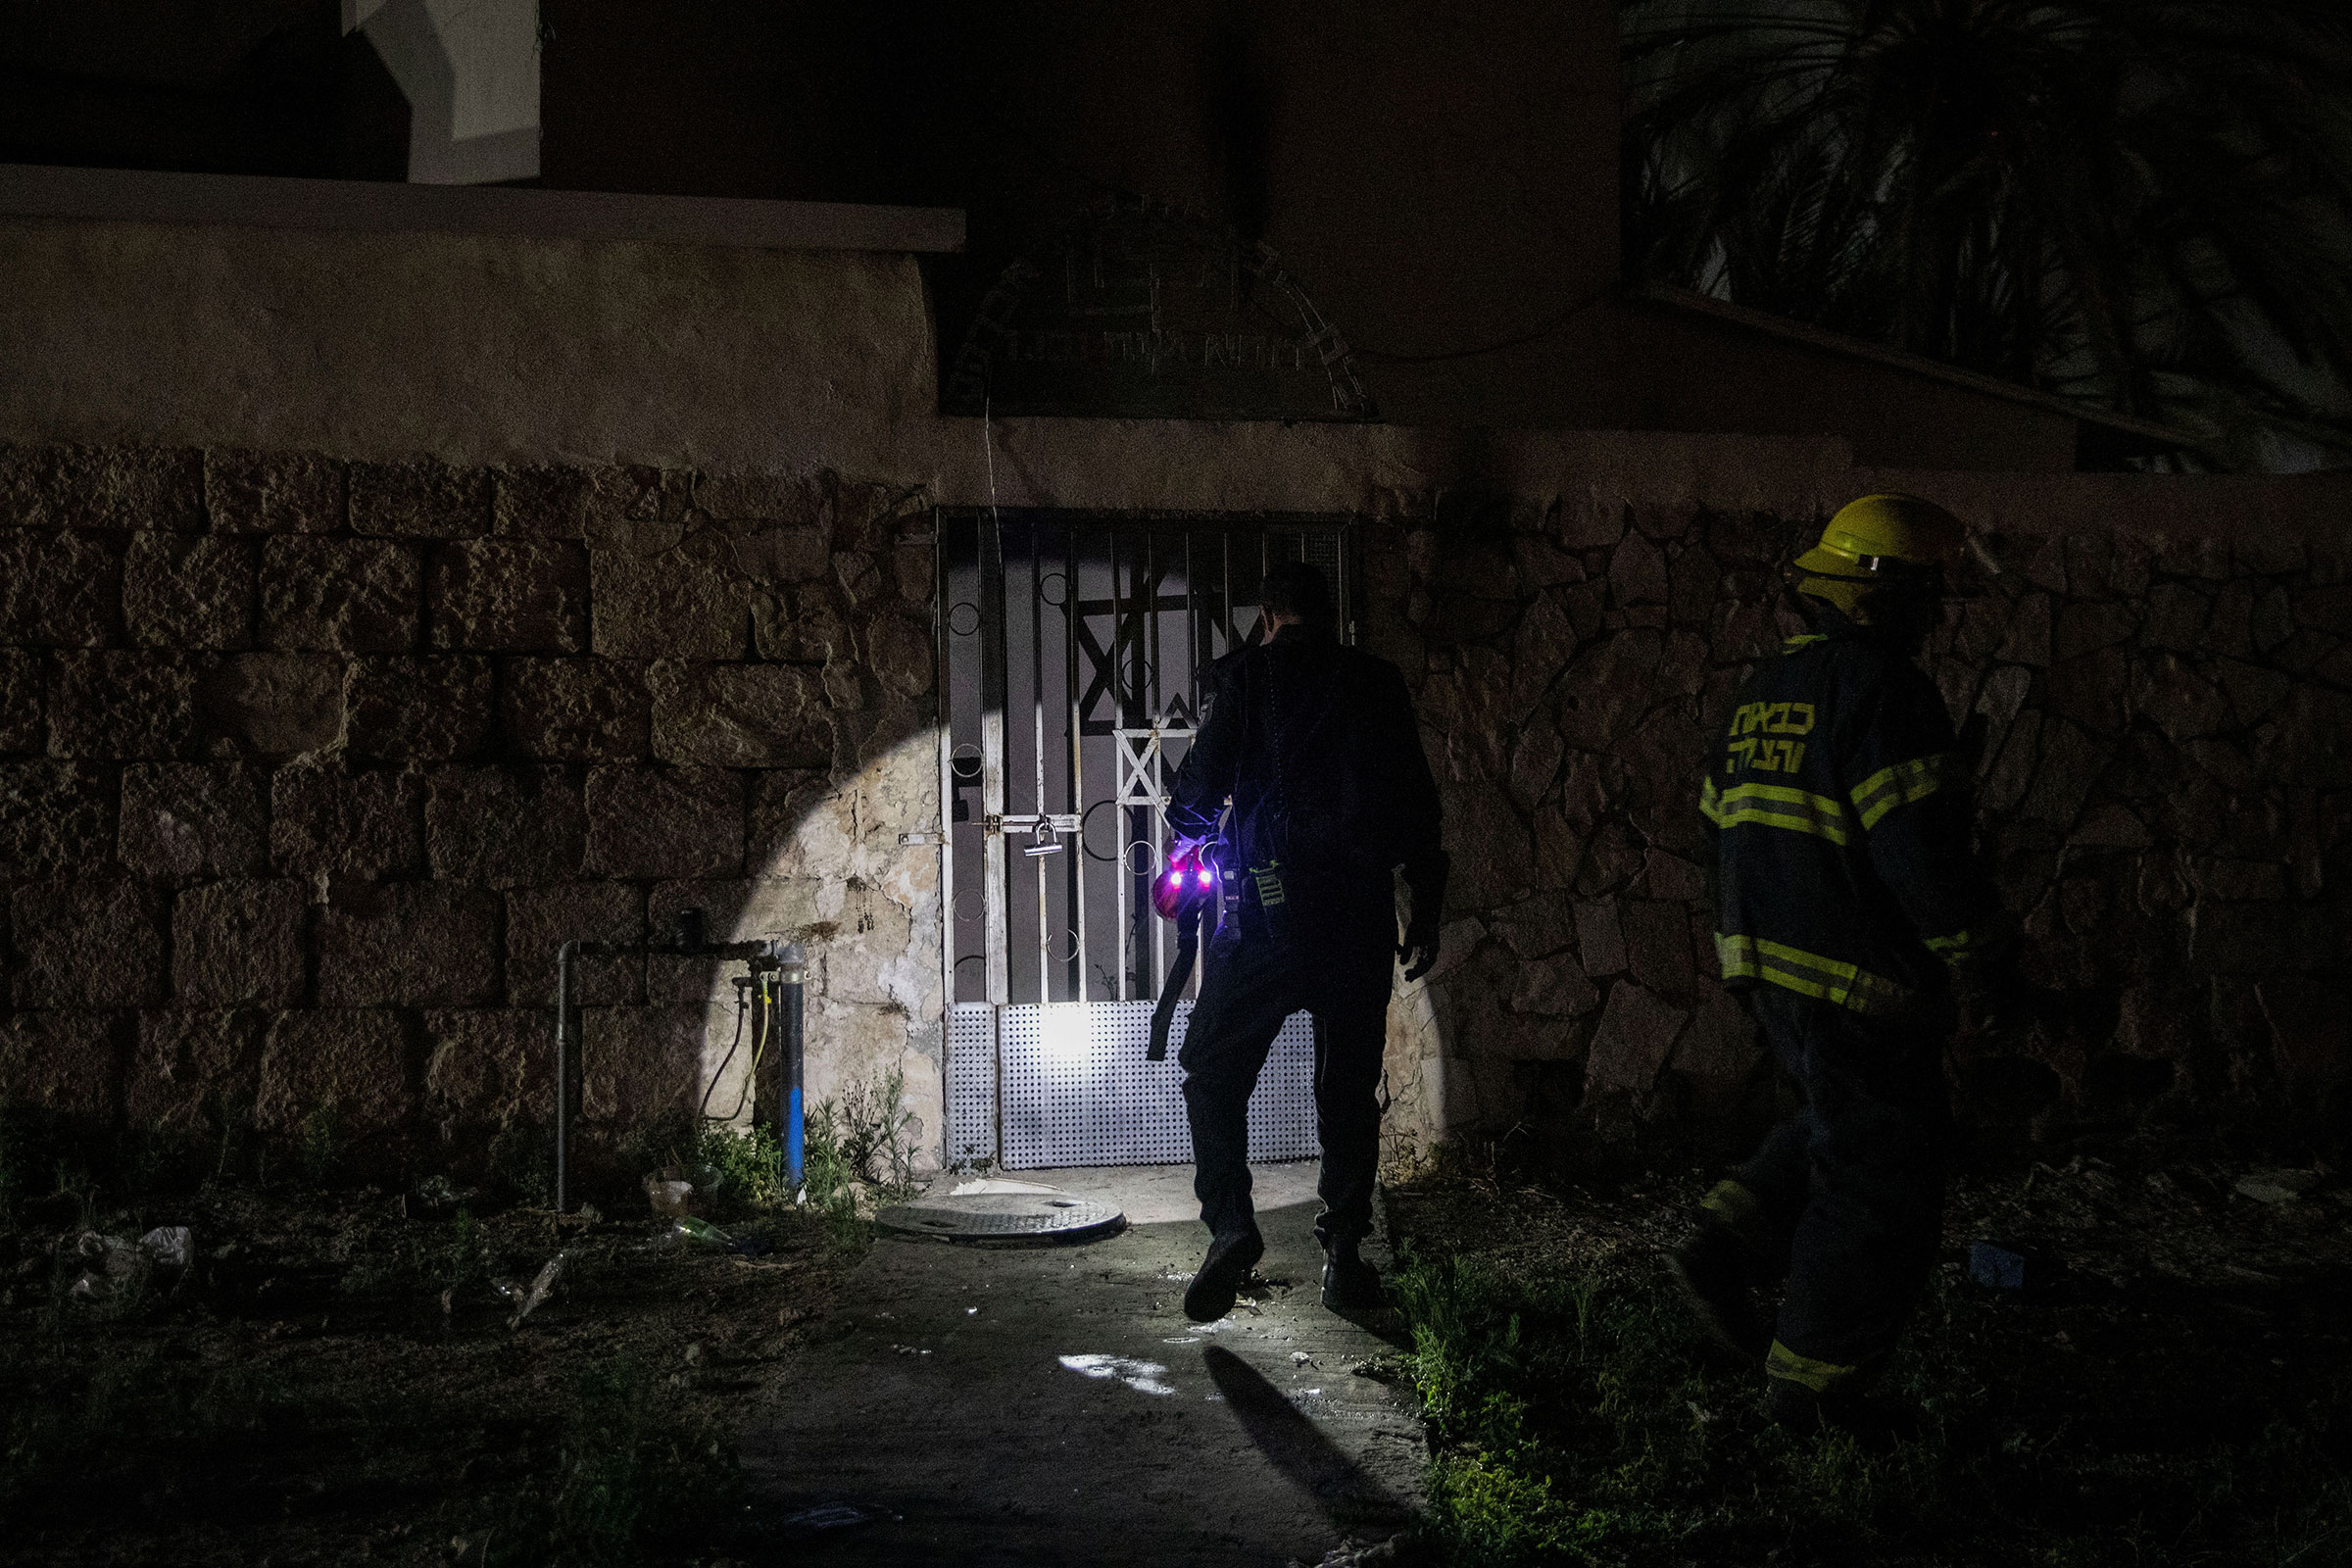 Firefighters inspect a synagogue that was set on fire during violent clashes in the mixed Arab-Jewish city of Lod, Israel, on May 14, 2021. (Oren Ziv—dpa/picture alliance/Getty Images)